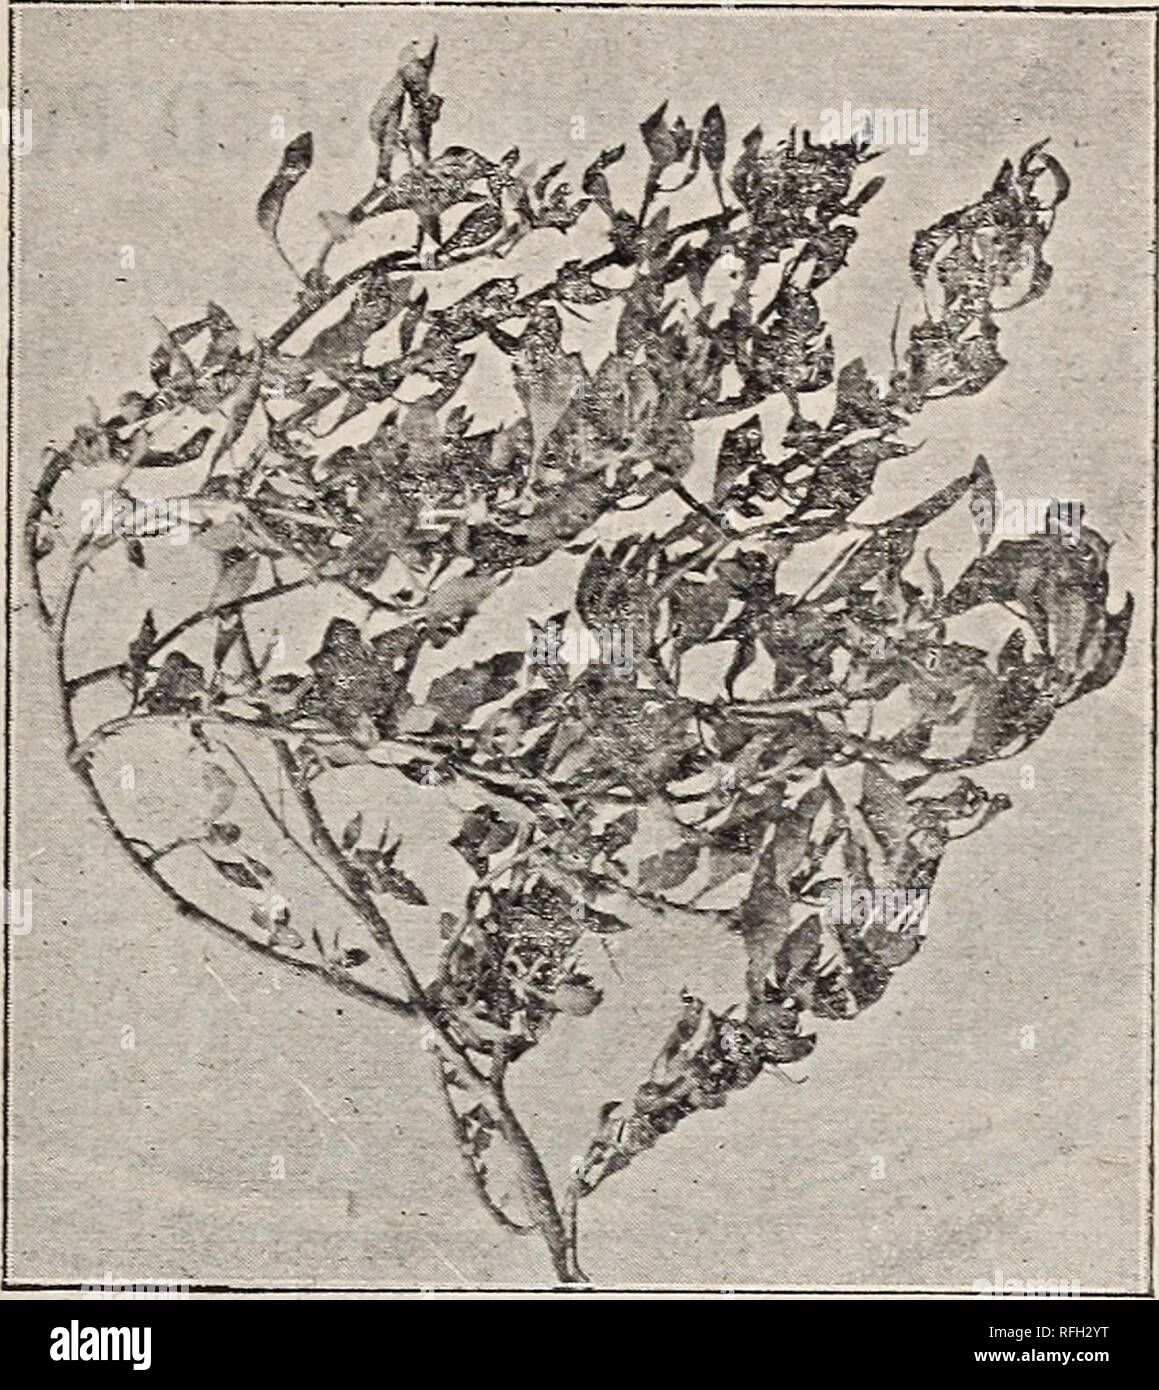 . Johnson &amp; Musser Seed Co.'s catalogue of reliable seeds. Nursery stock California Los Angeles Catalogs; Vegetables Seeds Catalogs; Flowers Seeds Catalogs; Agricultural implements Catalogs. 113 N. Main St., Los Angeles. 41 AUSTRALIAN* • SALT BUSH One of the few species of plants that will grow and thrive in alkali soils. We offer the two best varieties. ATRIPLEX HALIMONDES, or Sweet Salt Bush,—Introduced by us last season. Has many advantages over the older sorts. It grows readily in the rankest alkali. Please note that these images are extracted from scanned page images that may have bee Stock Photo